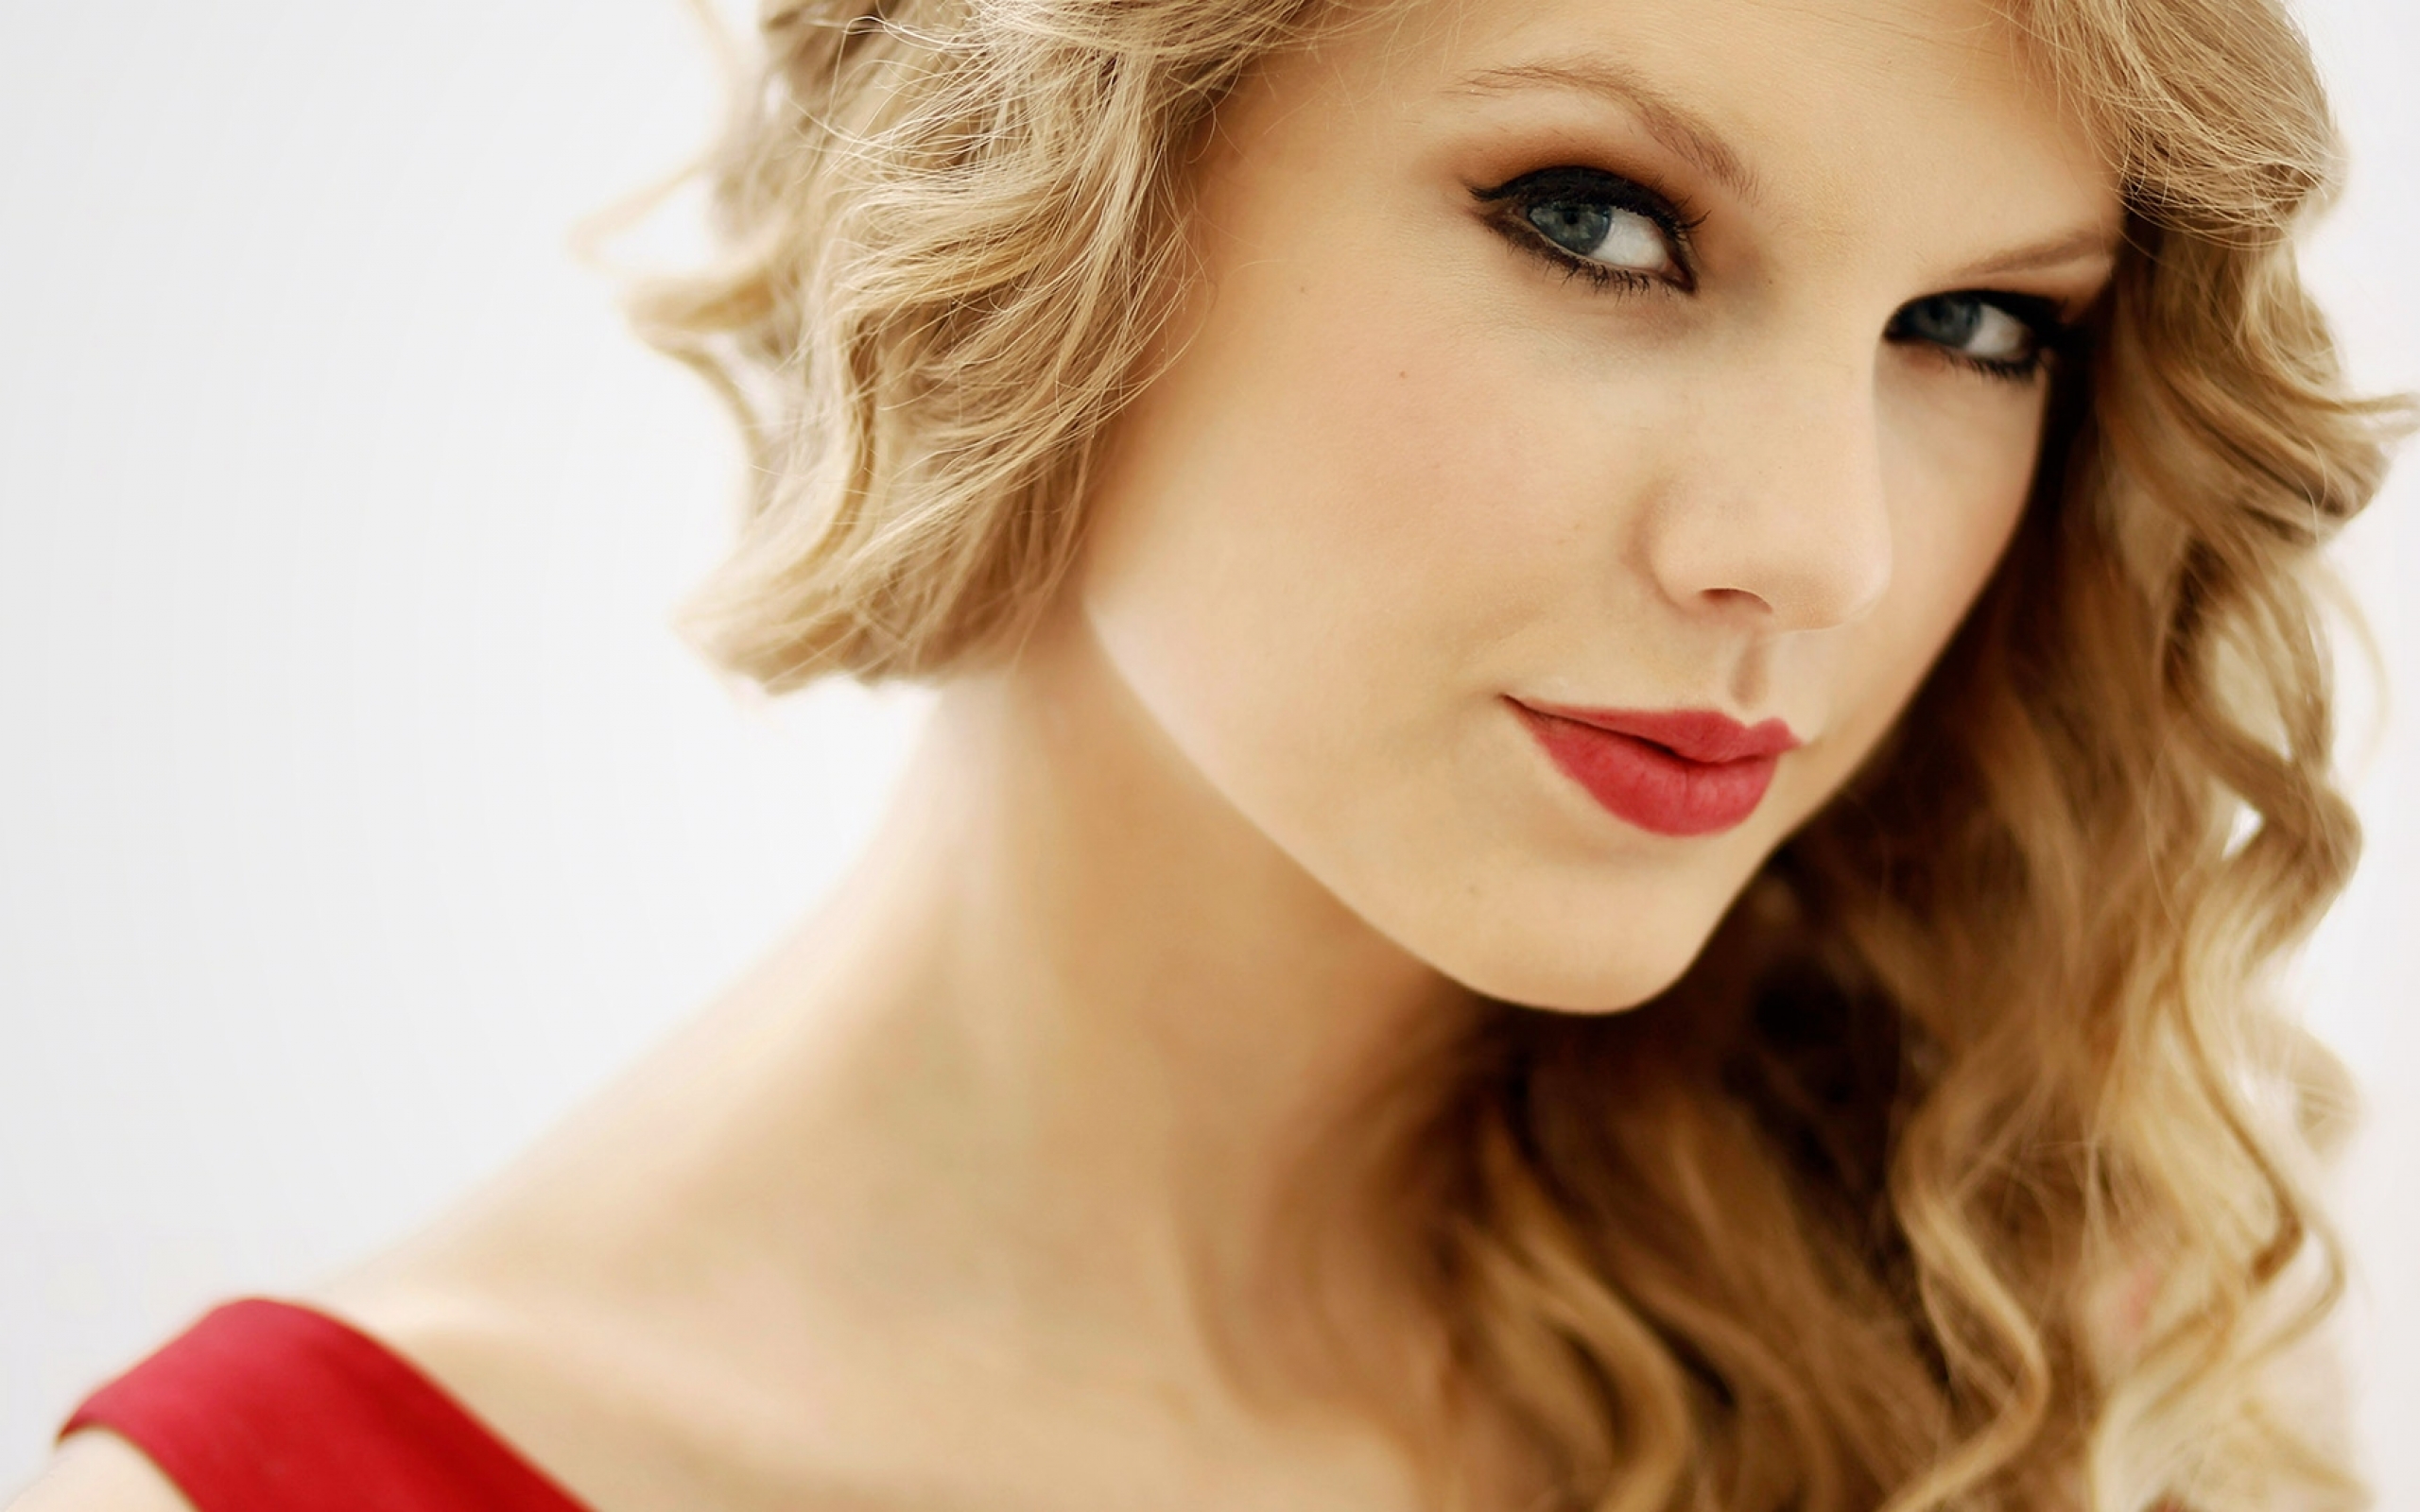 blondes_women_taylor_swift_celebrity_singers_faces_white_background_red_lips_1920x1080_wallpaper_Wallpaper_2560x1600_www.wallpaperswa.com